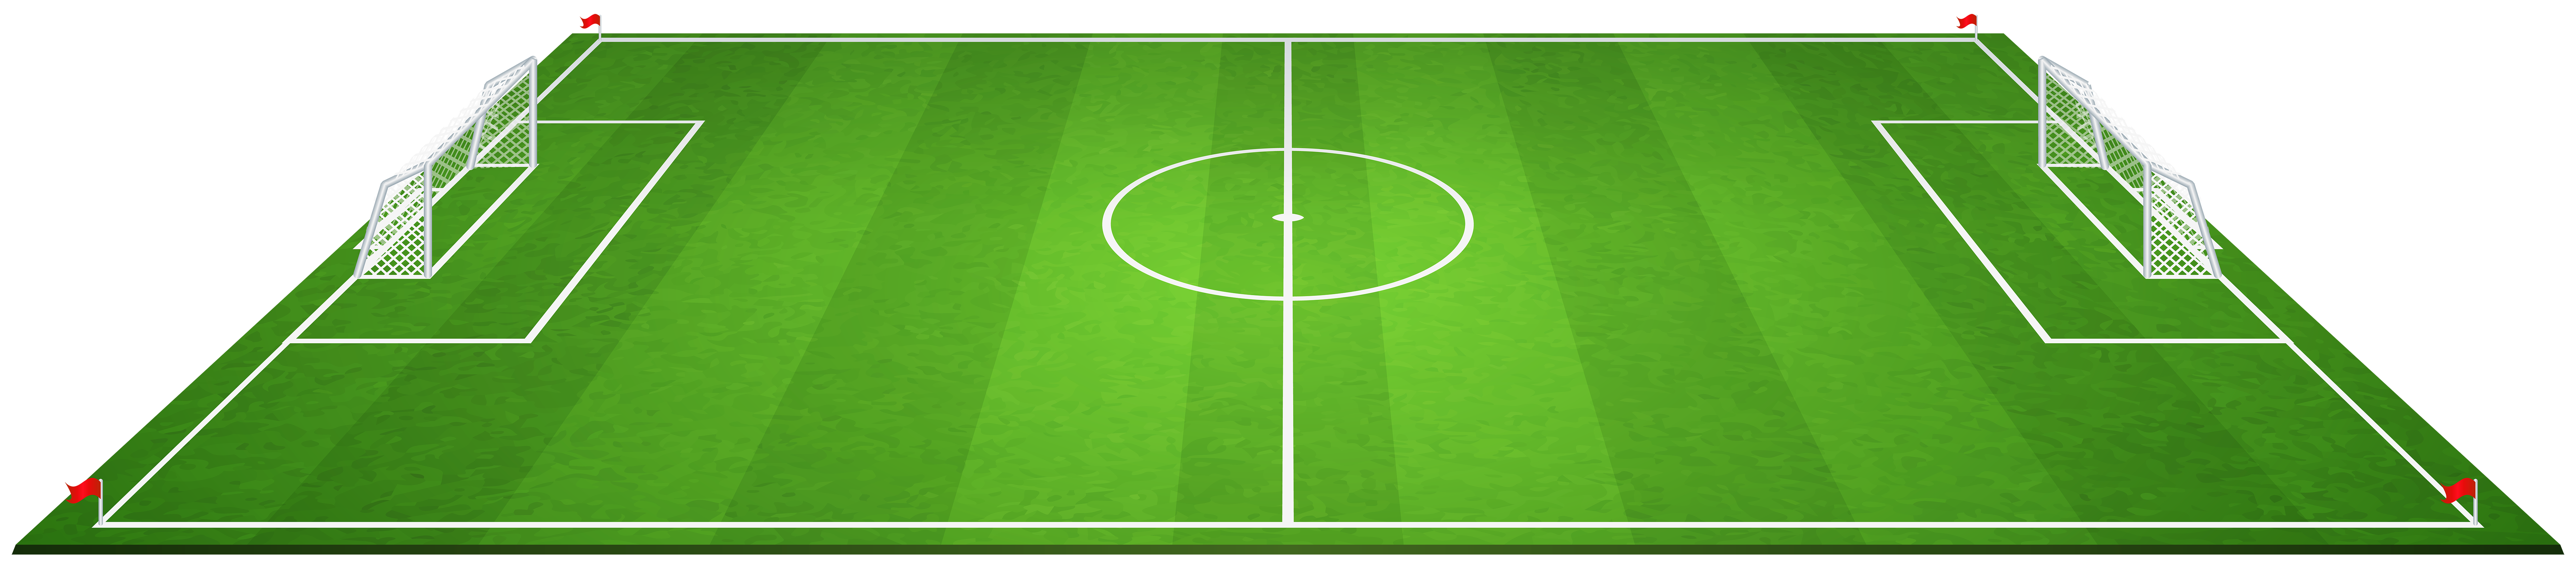 Soccer Field Transparent PNG Image | Gallery Yopriceville - High ...